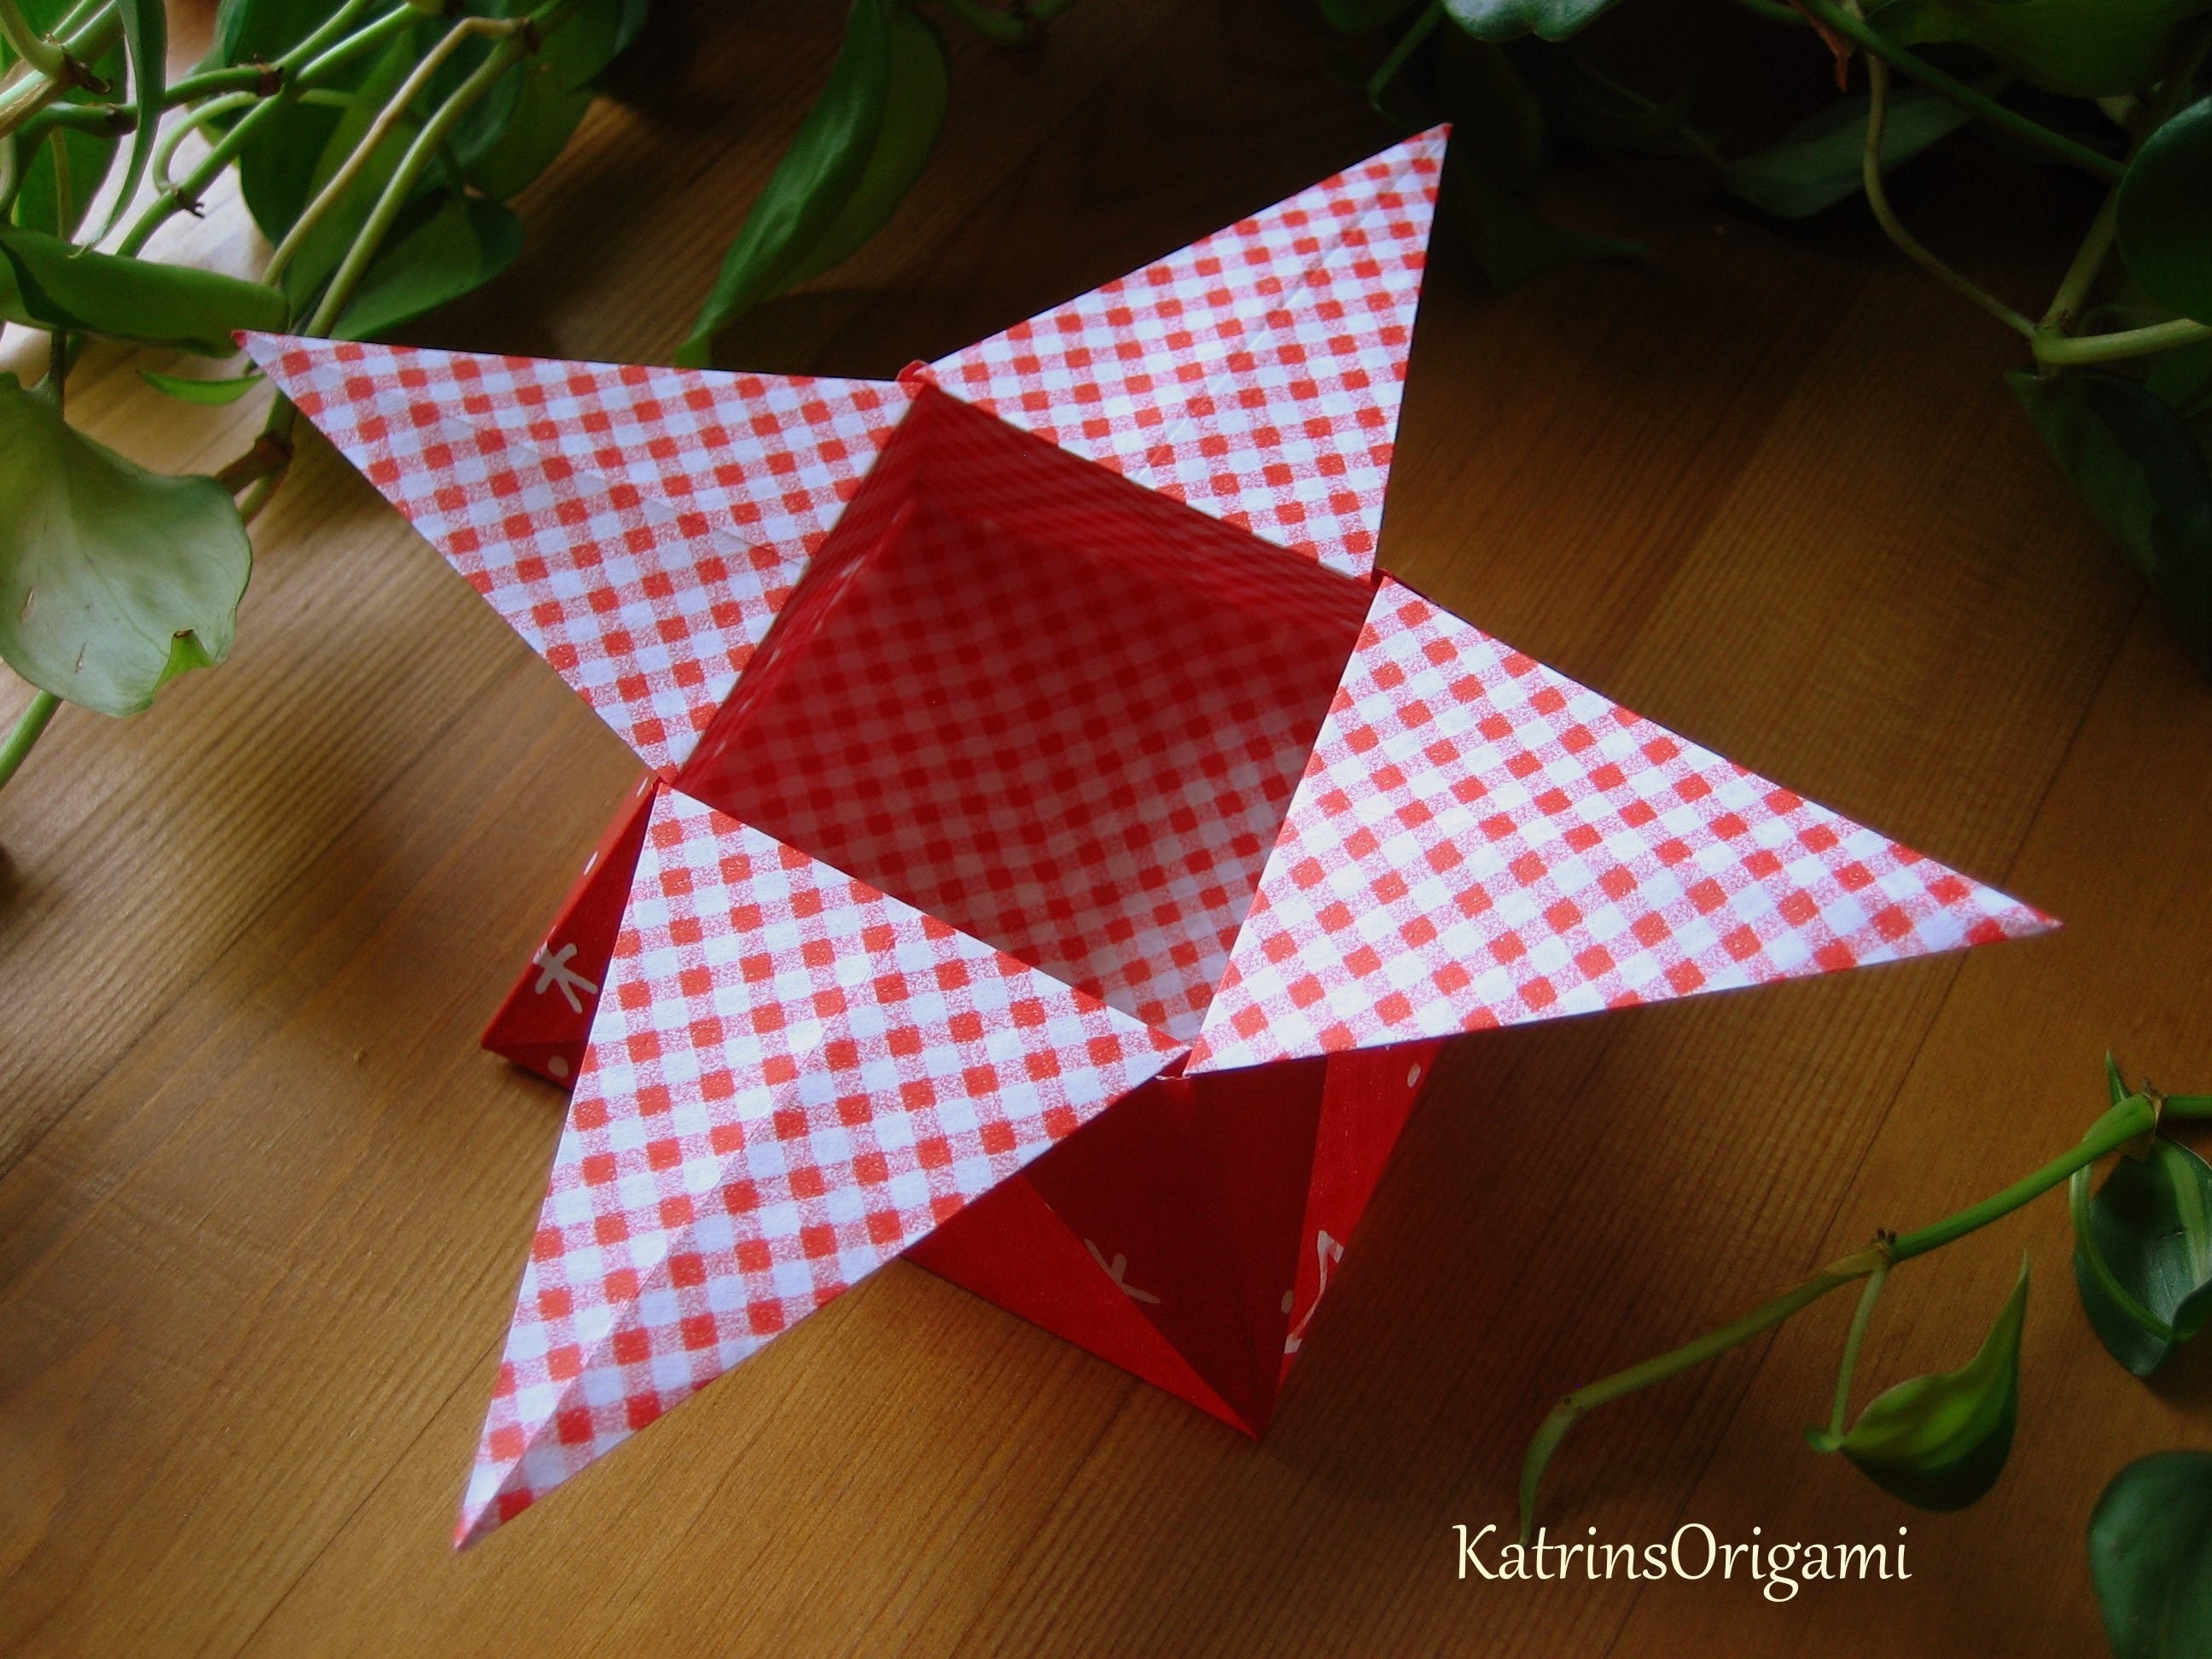 Origami ☆ Star Box ☆ ( traditional )  ¸.•*☽☼﻿☾*•.¸¸